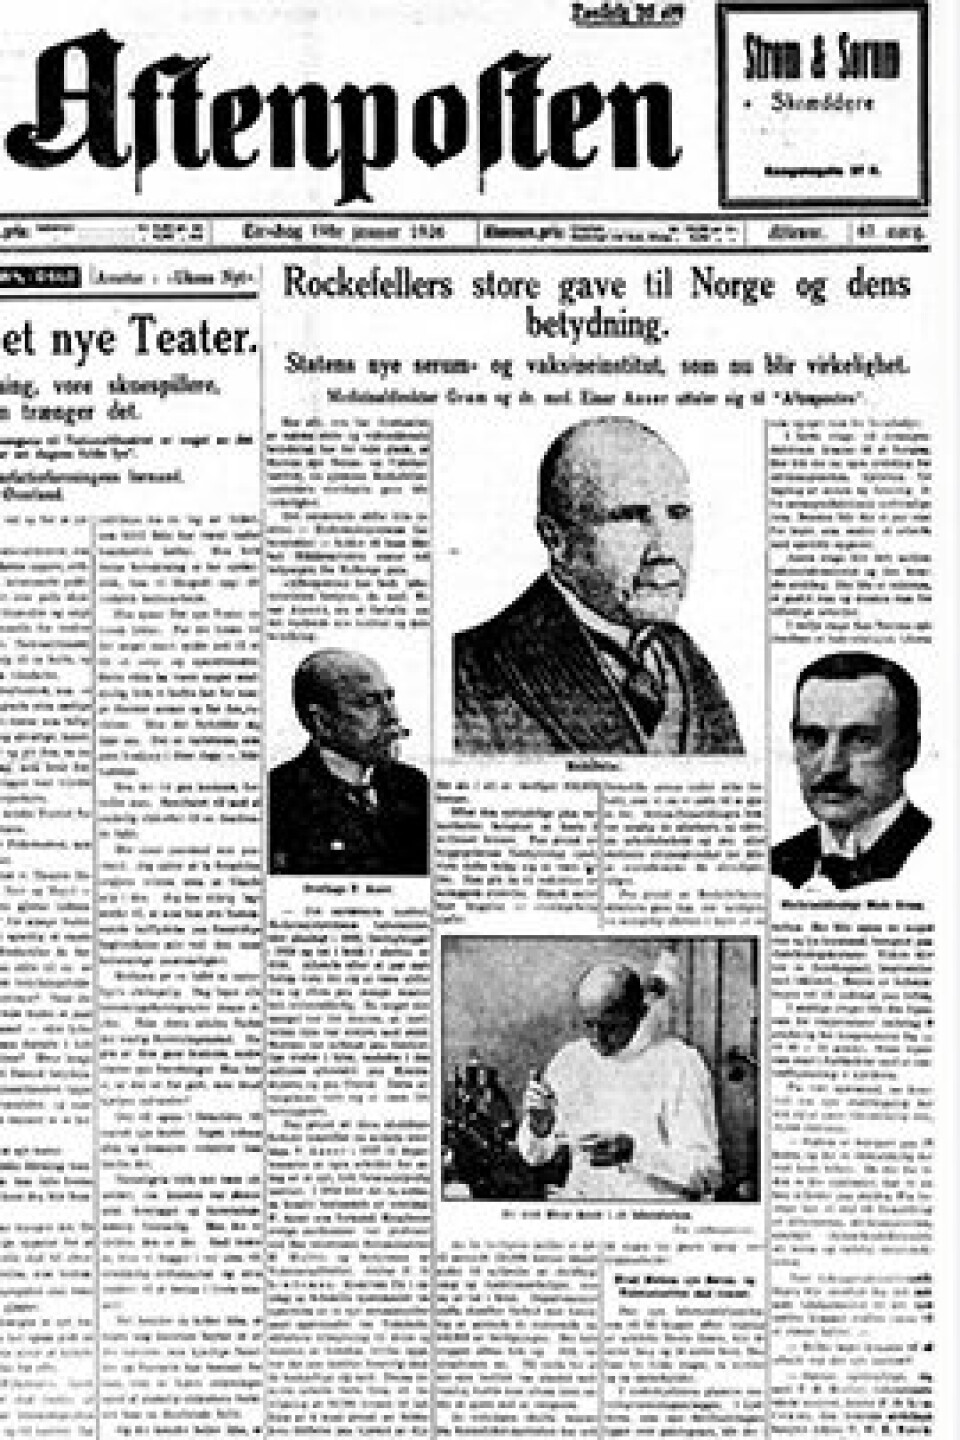 The press cheered Rockefeller's gift to the Institute of Public Health. Facsimile from Aftenposten January 19th 1926.